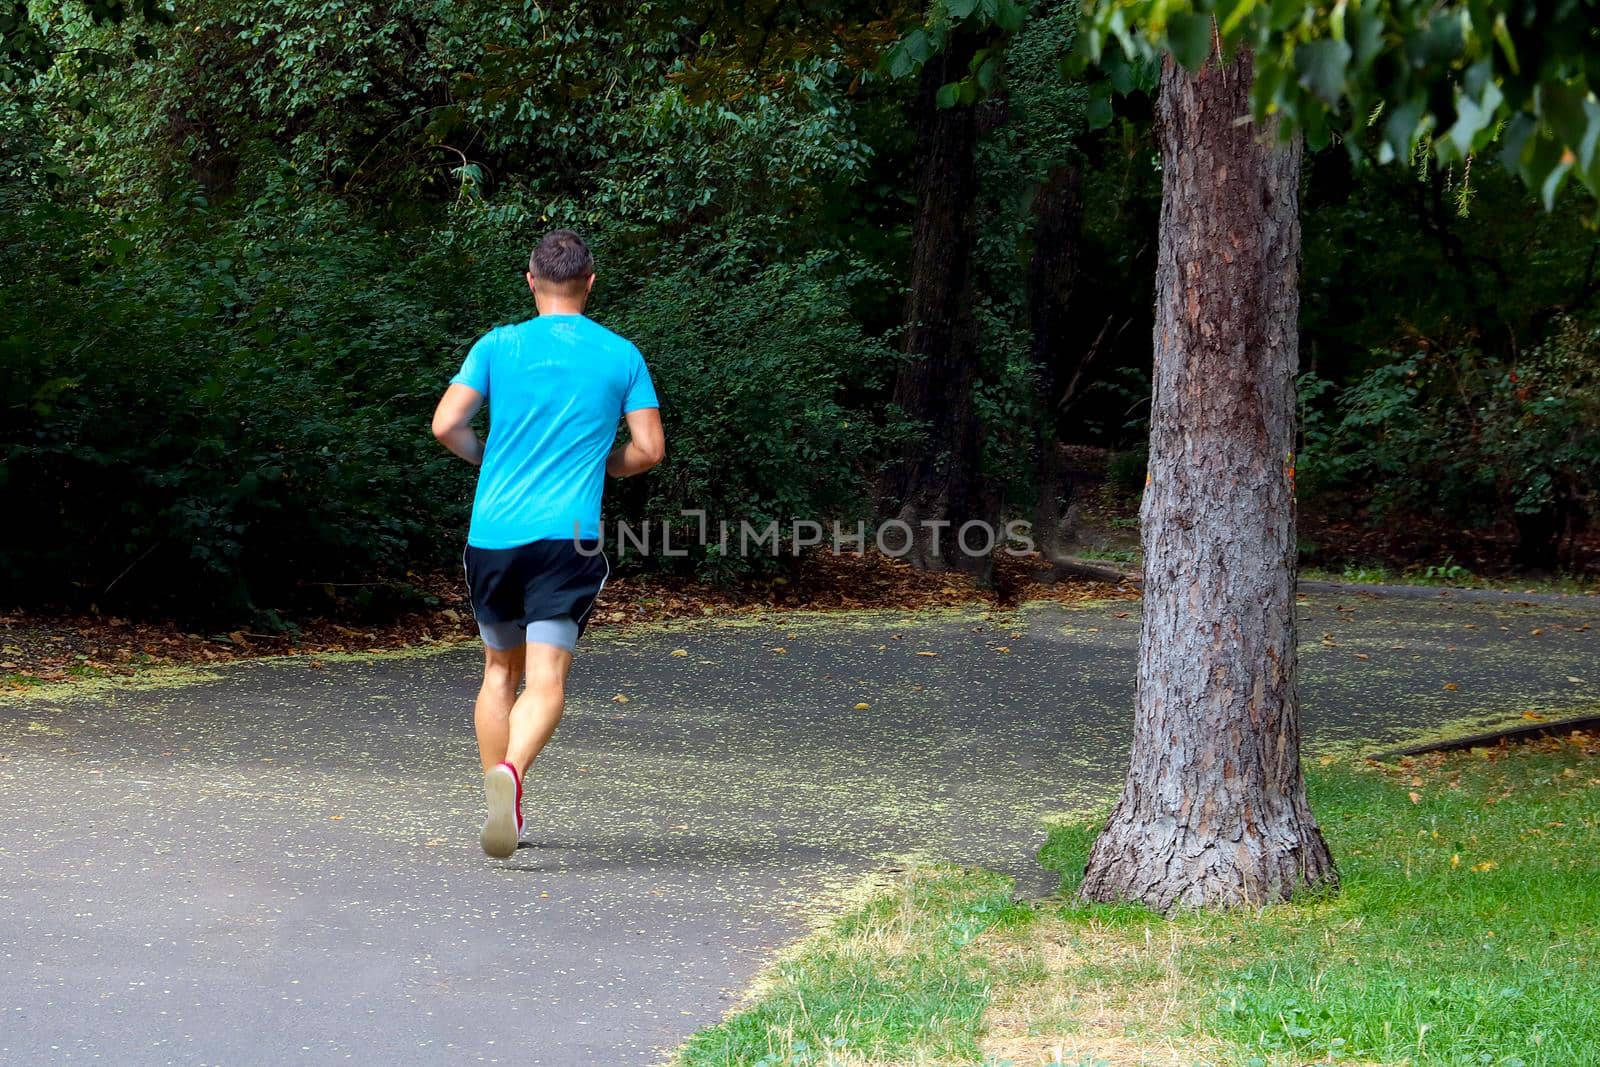 A view of a man running in the park. Sports